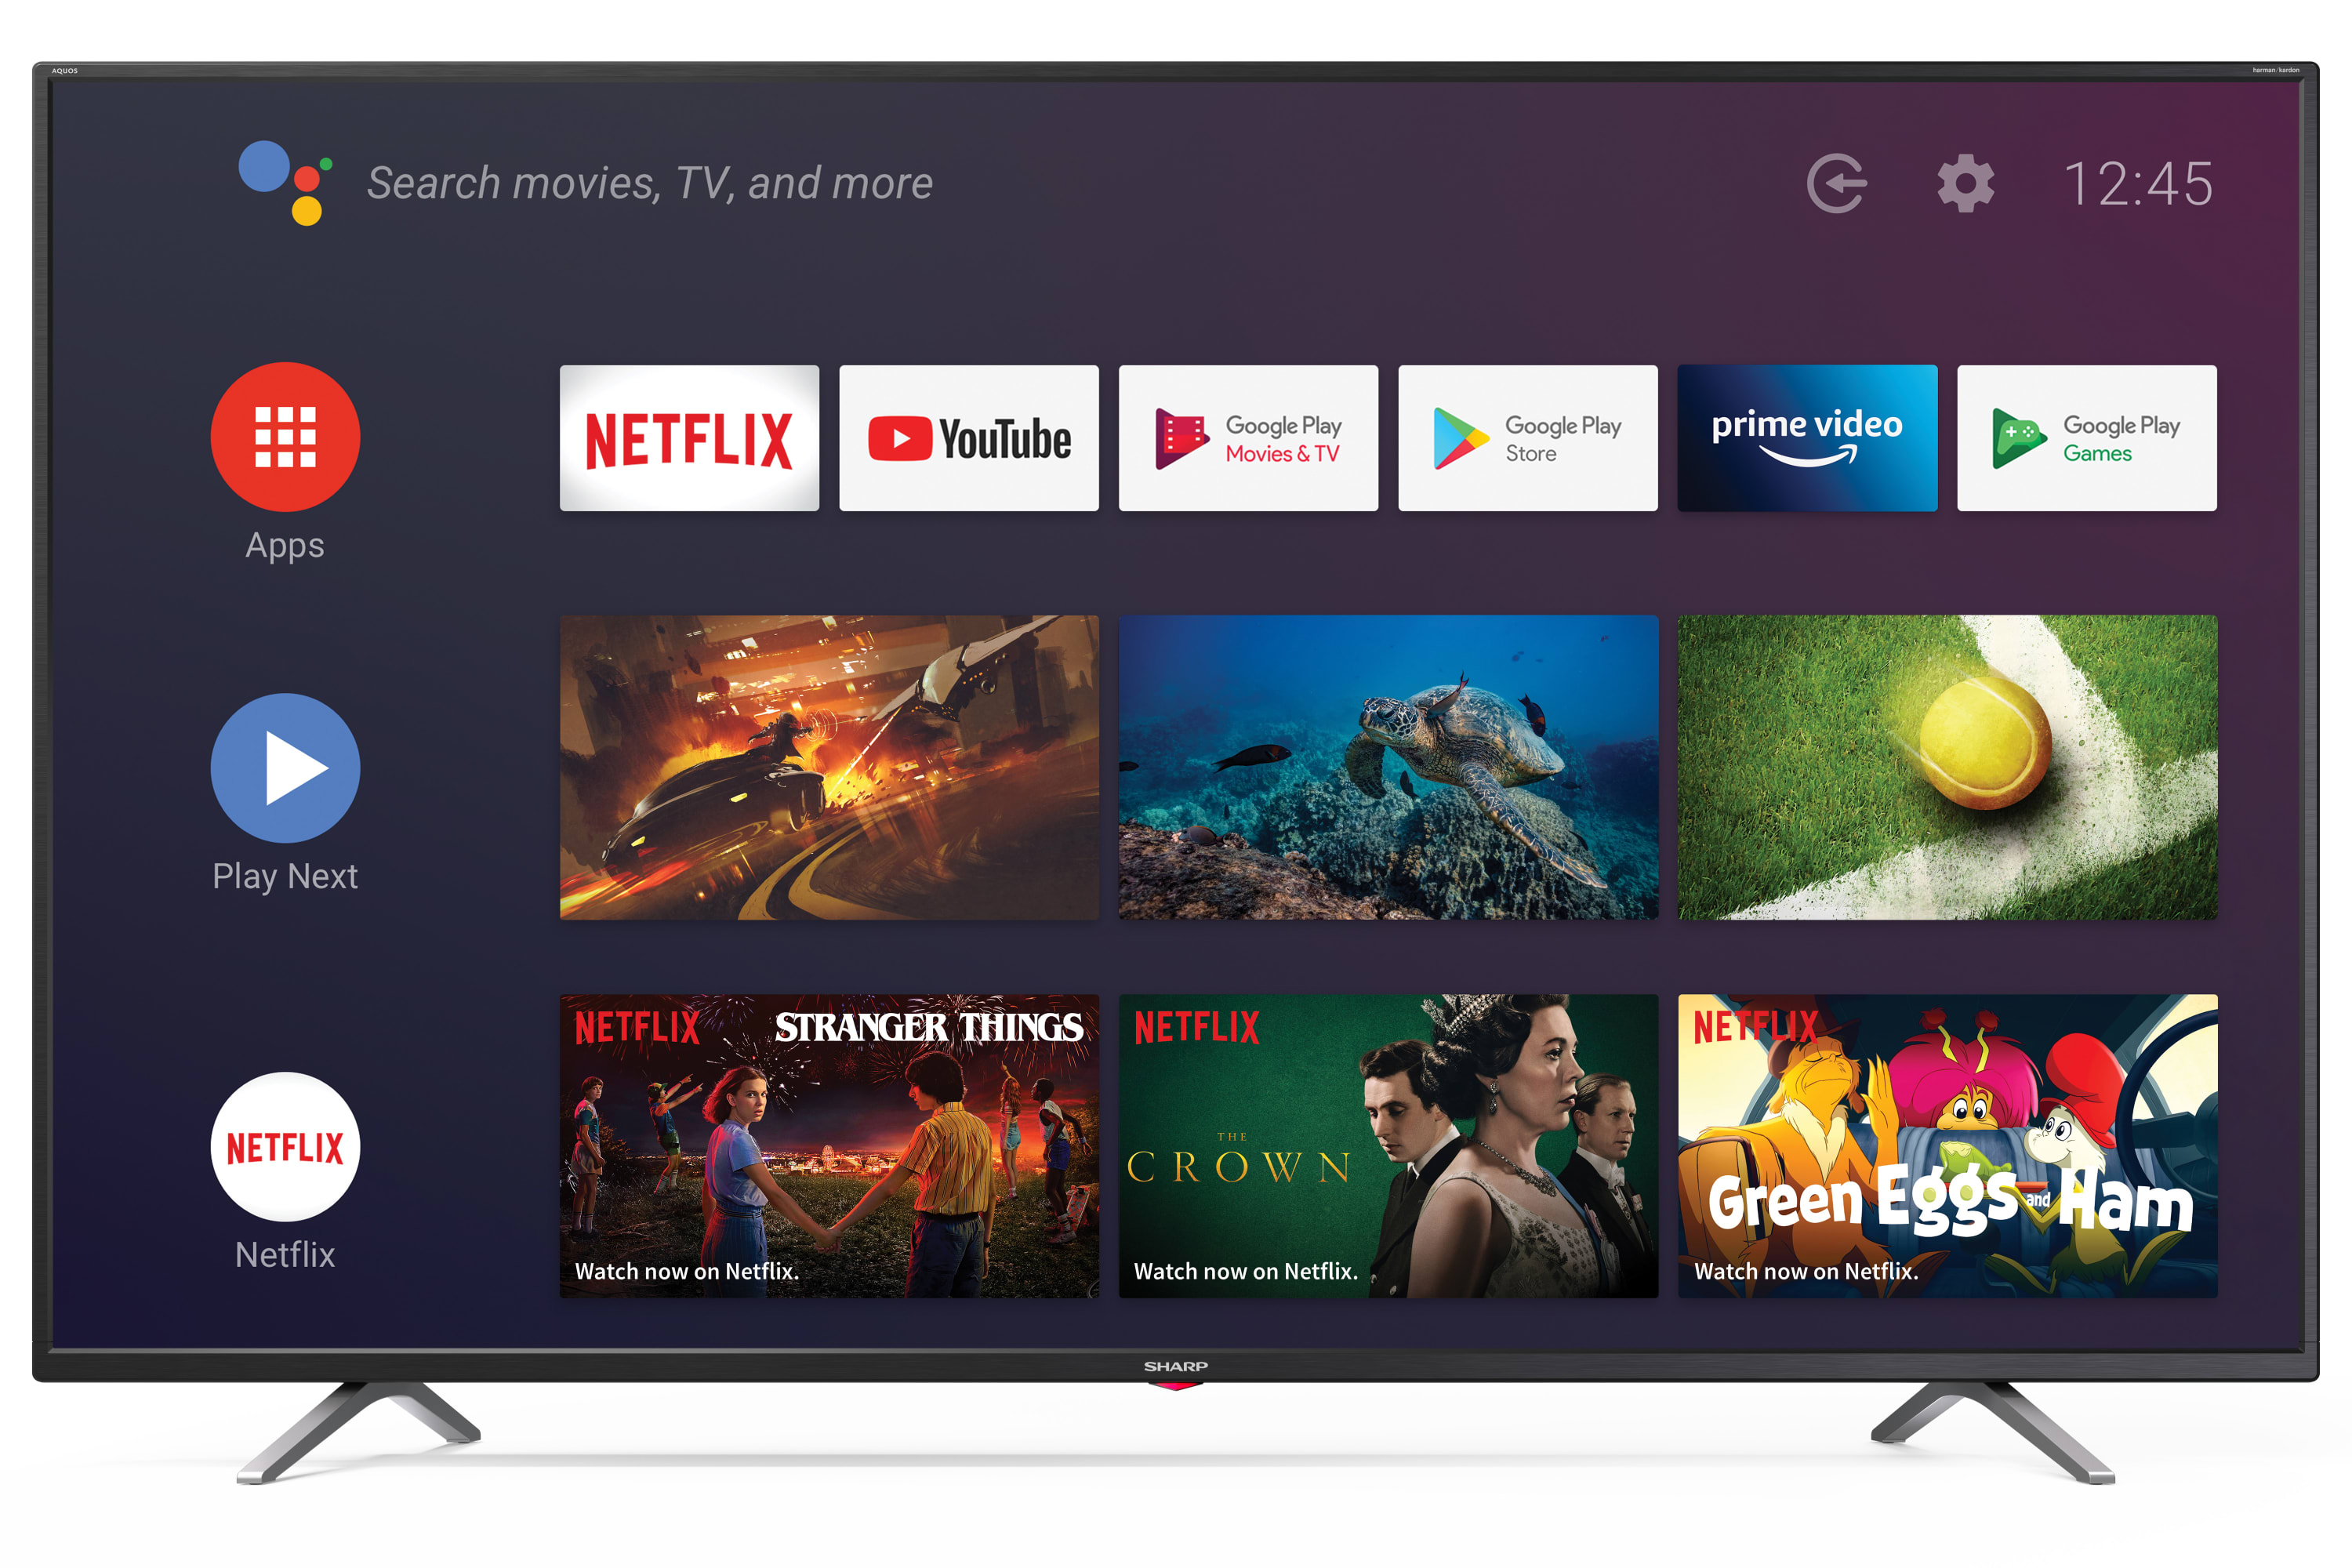 Android TV 4K UHD - 65" 4K ULTRA HD ANDROID TV™